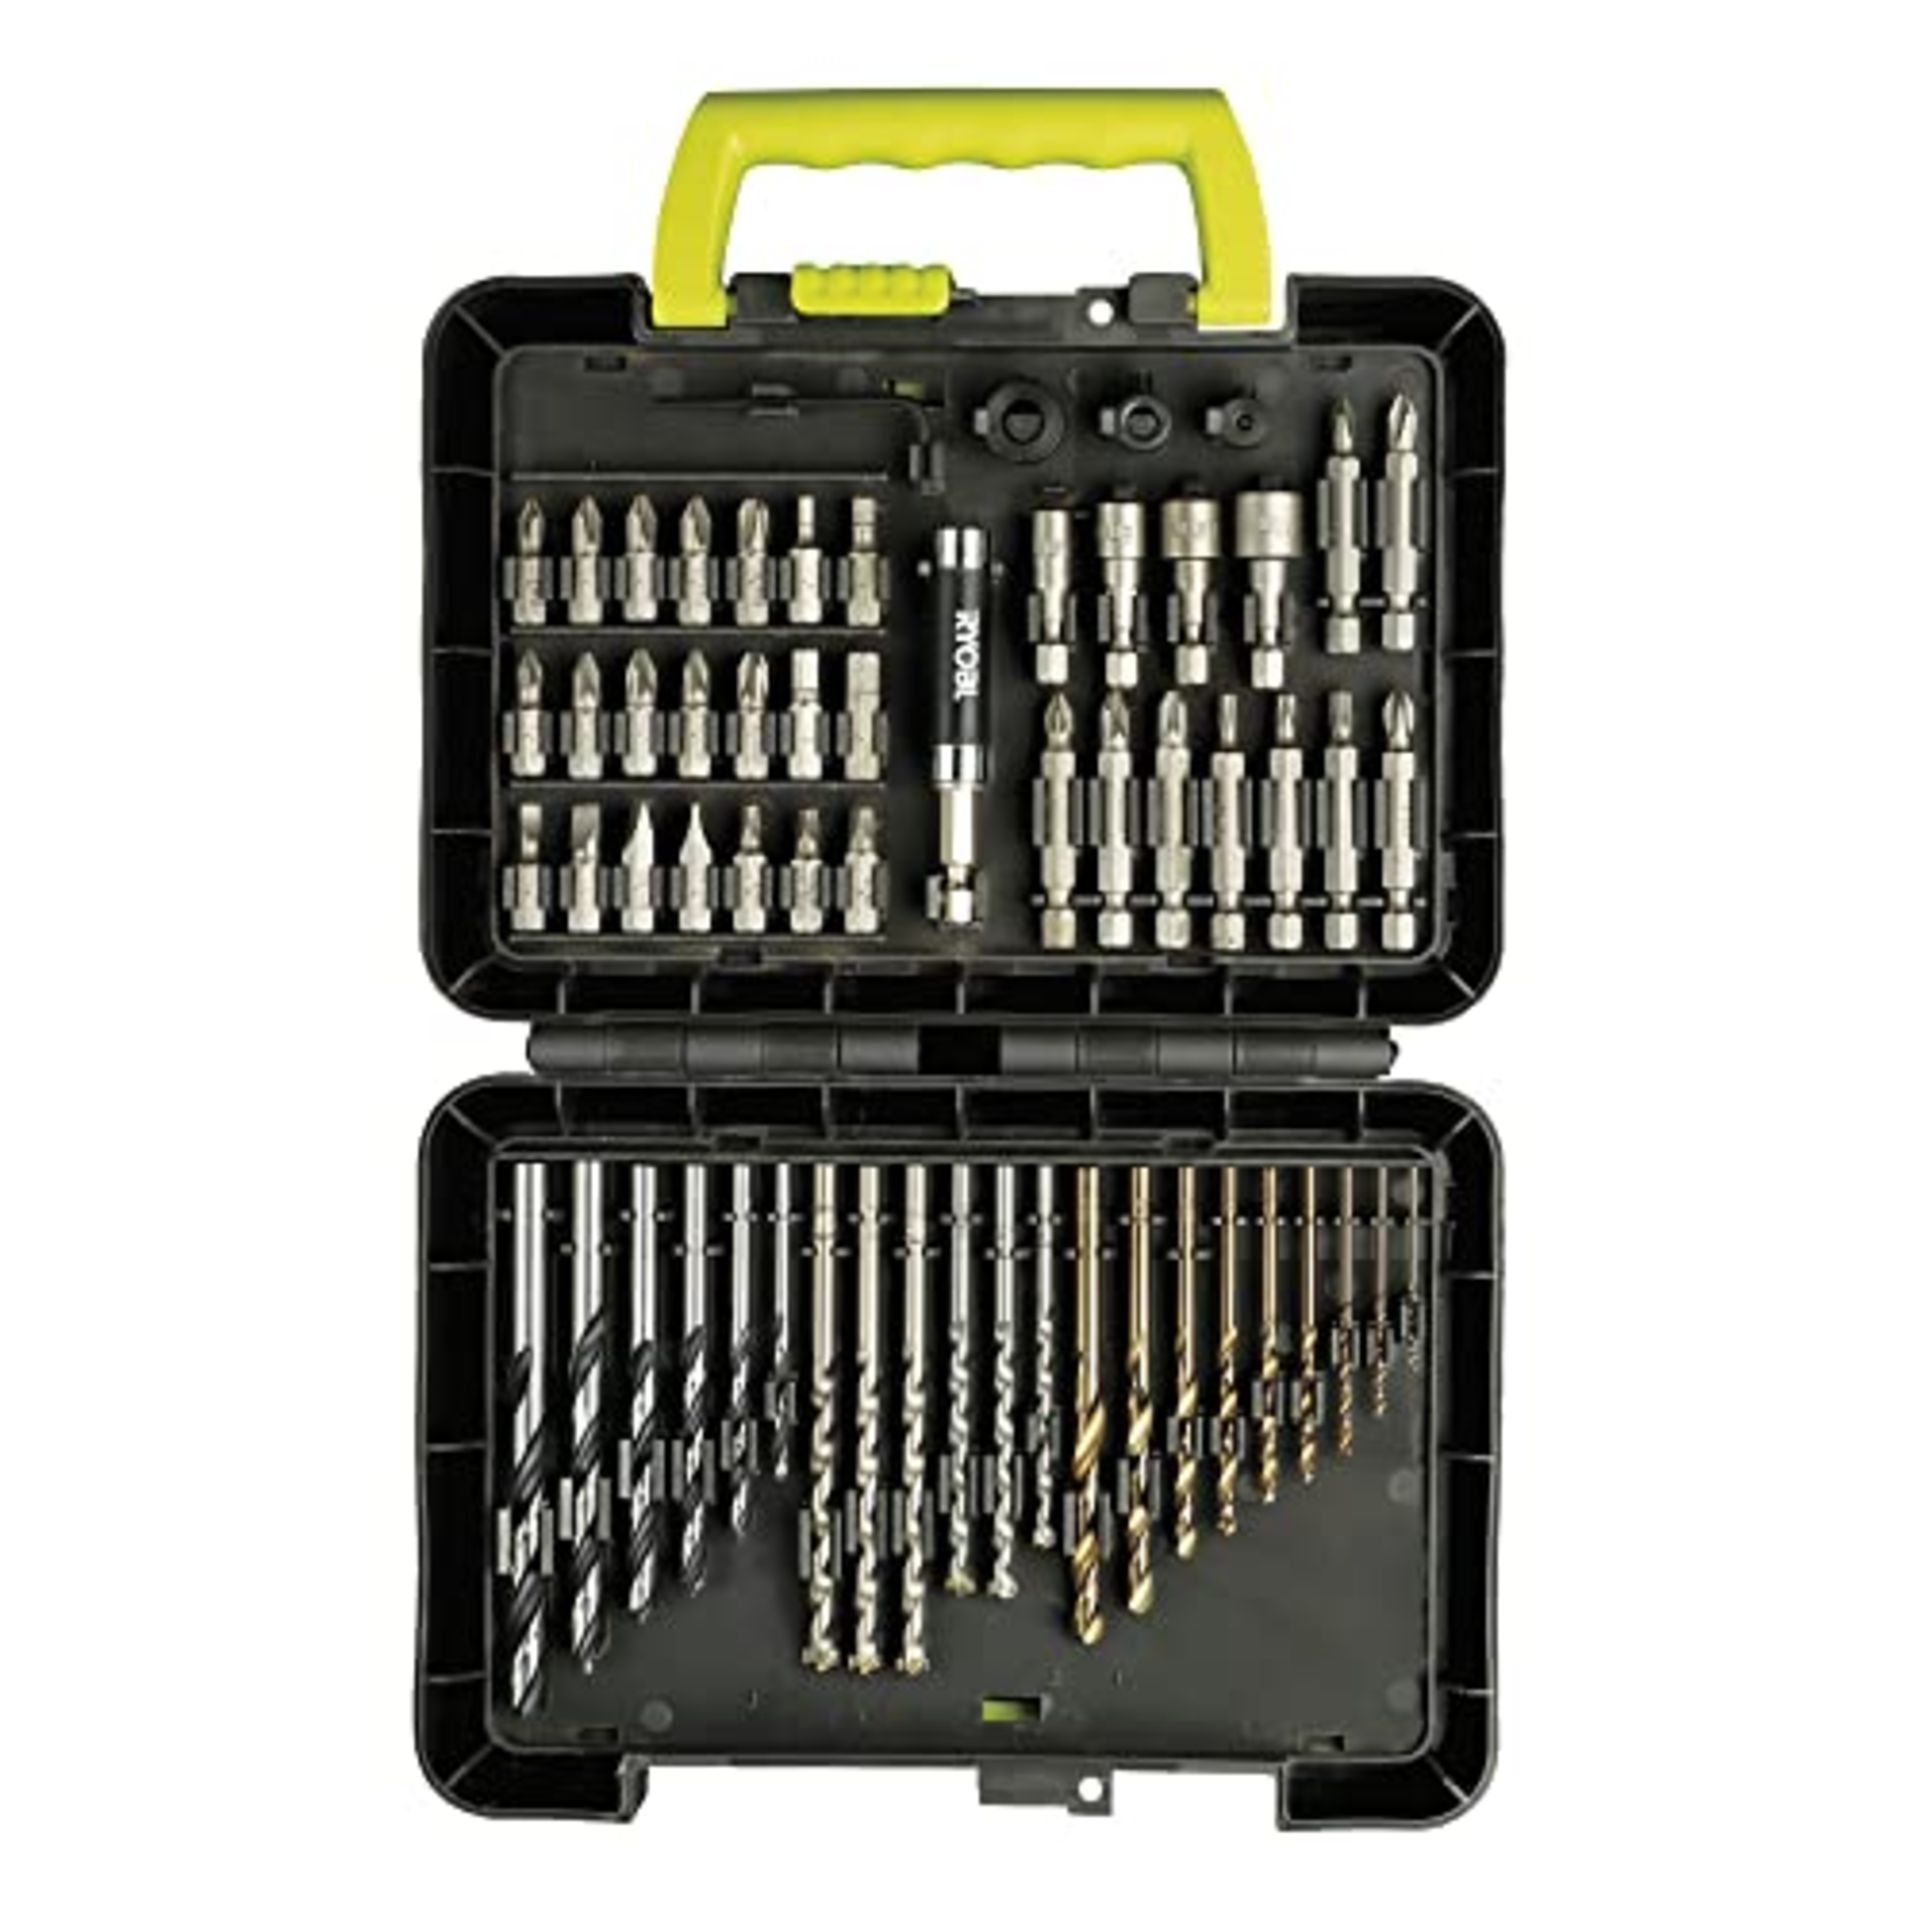 Ryobi bit and Drill Set 60 Pieces RAK60DDF (Accessory Set for Drilling and screwing)